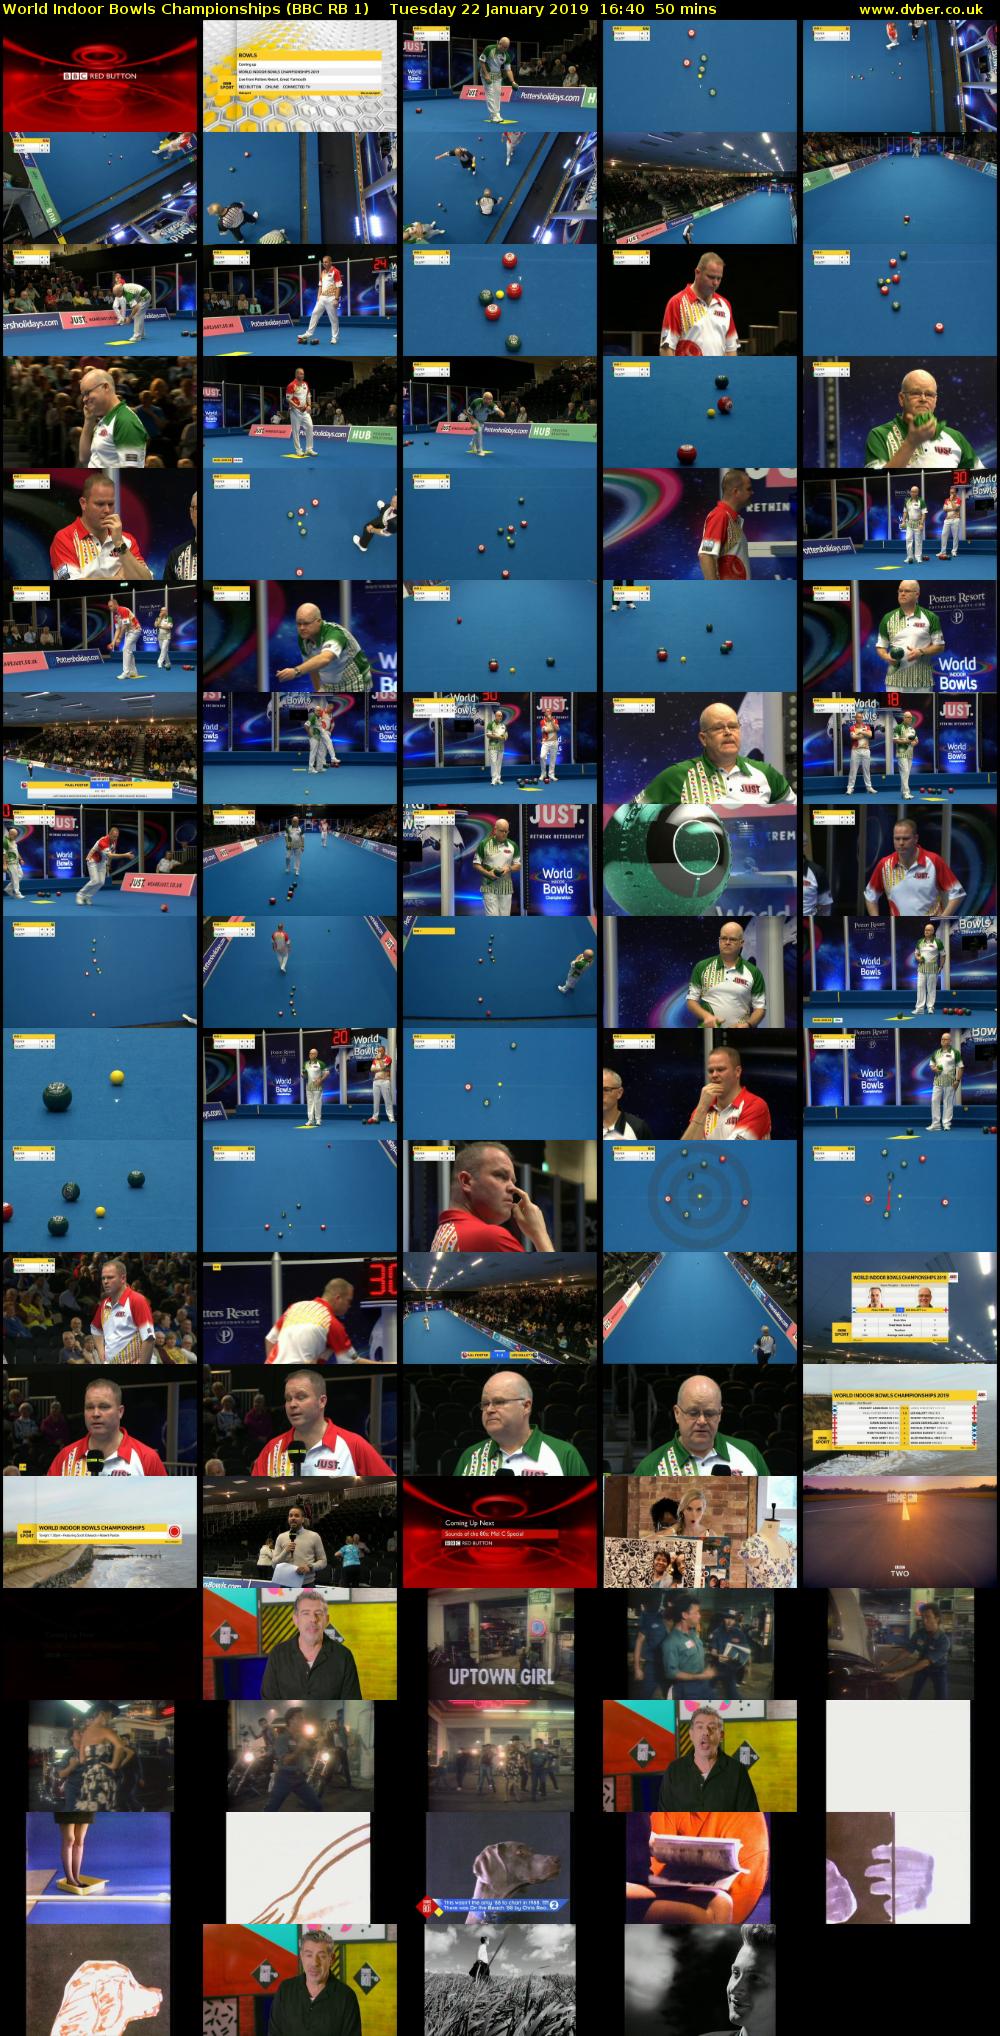 World Indoor Bowls Championships (BBC RB 1) Tuesday 22 January 2019 16:40 - 17:30